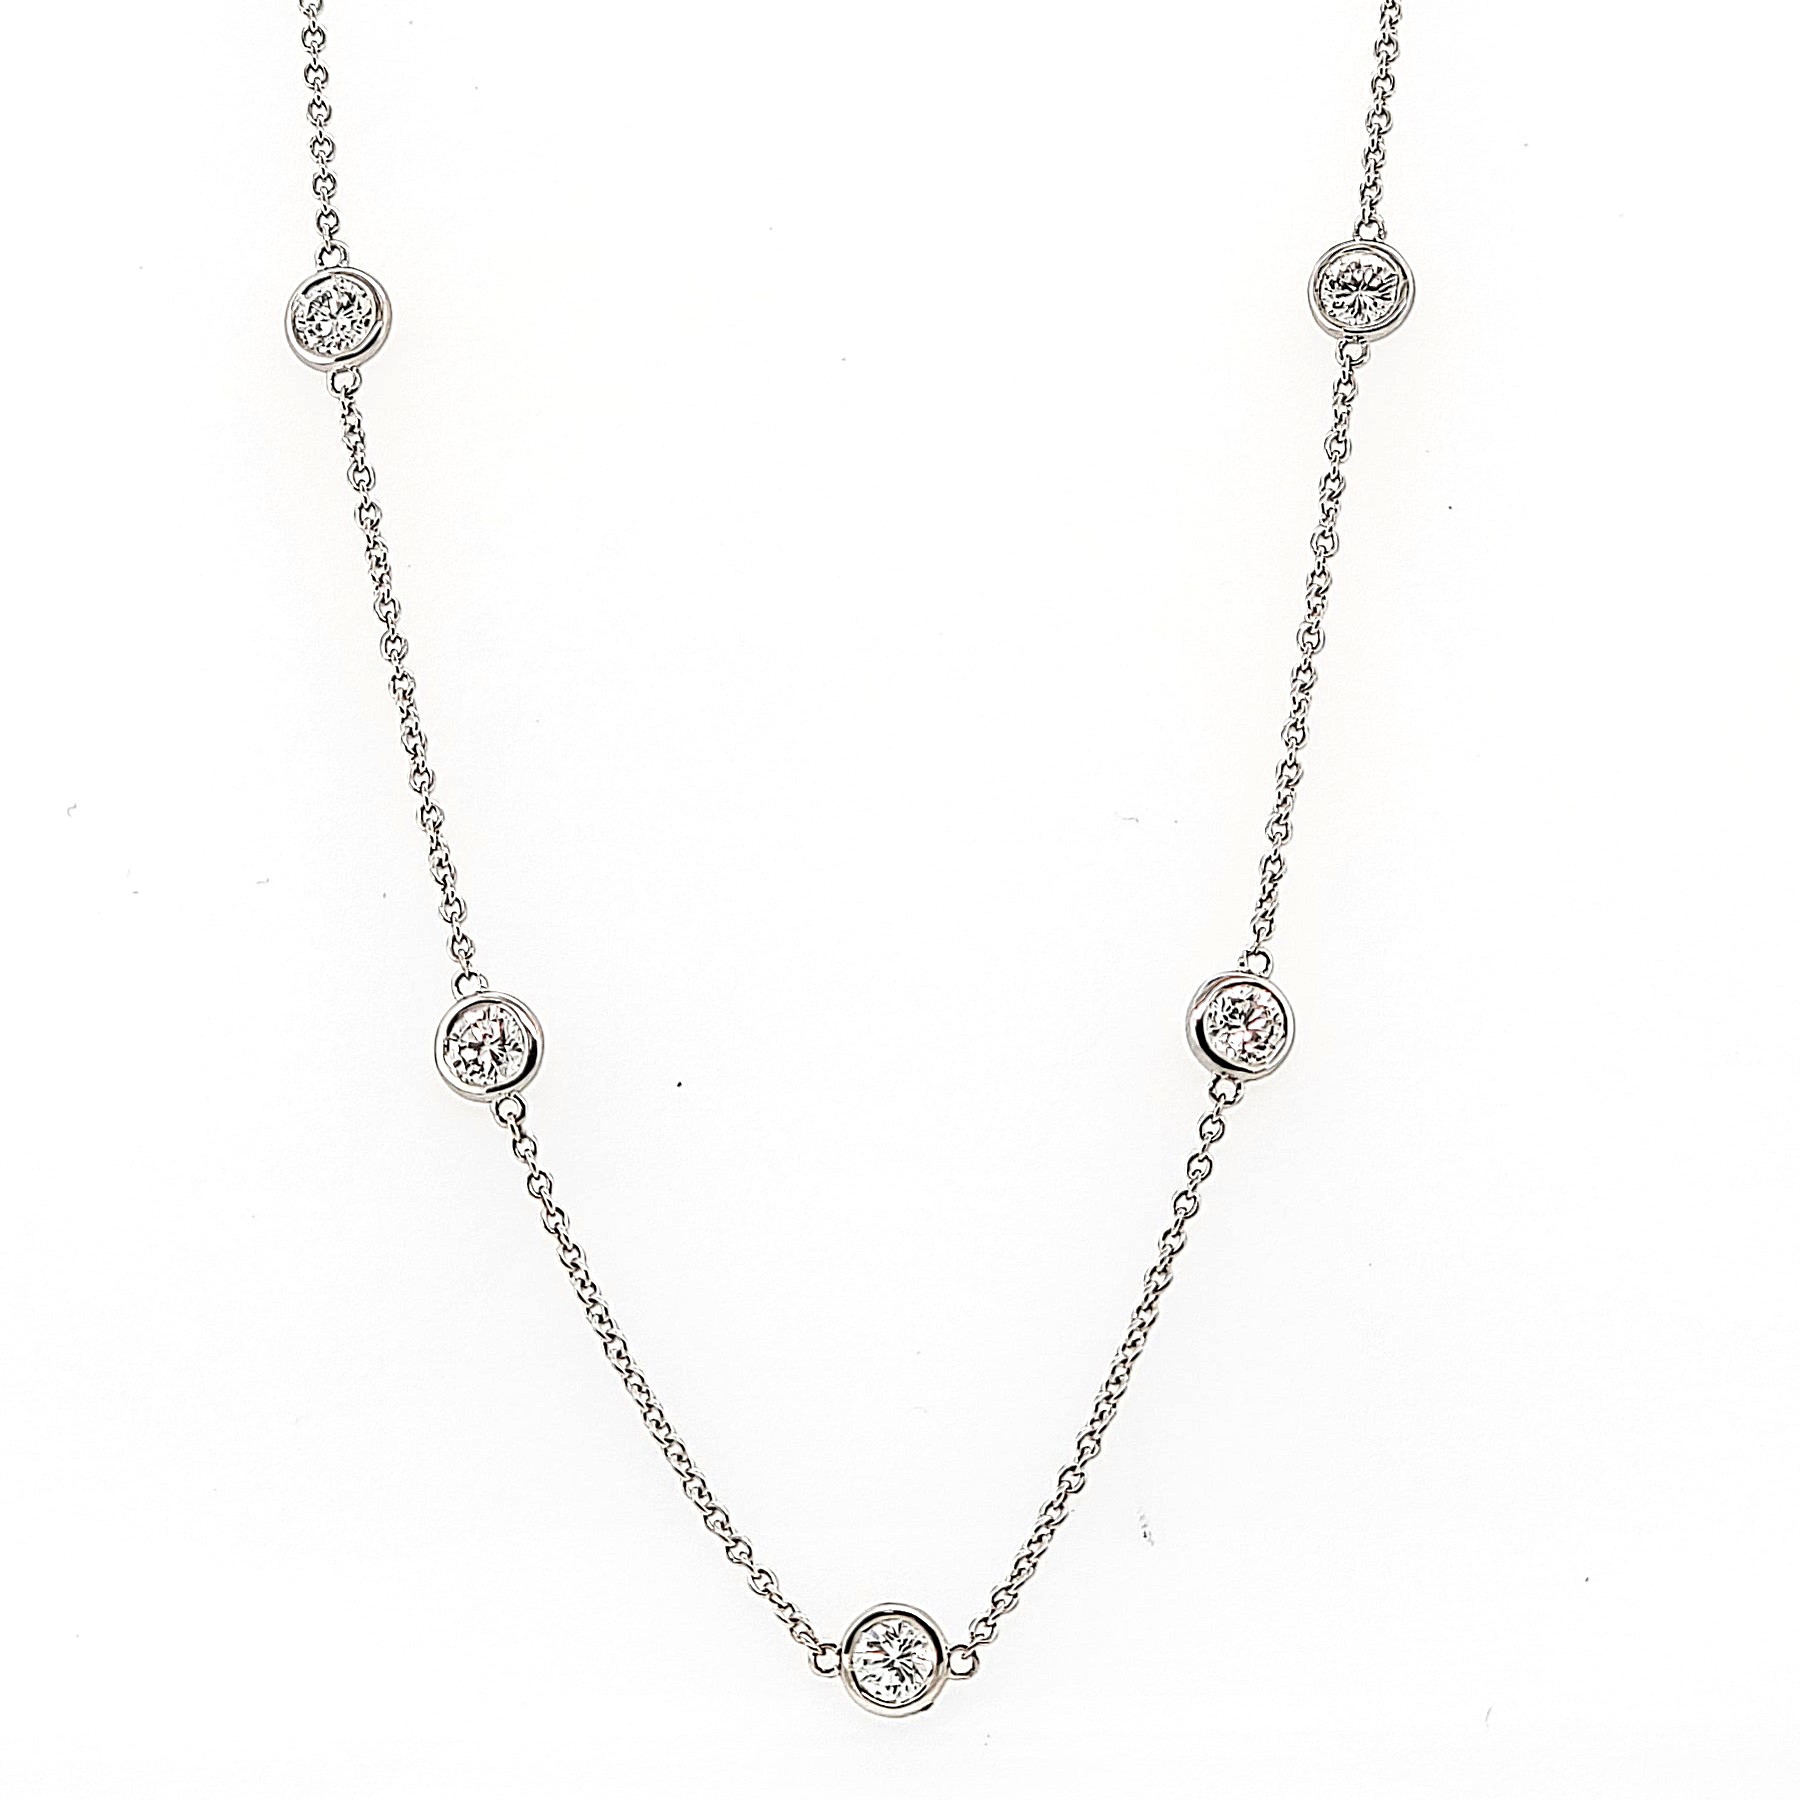 Moroccan Quad Diamond Station Chain Necklace by Jude Frances - NEWTWIST